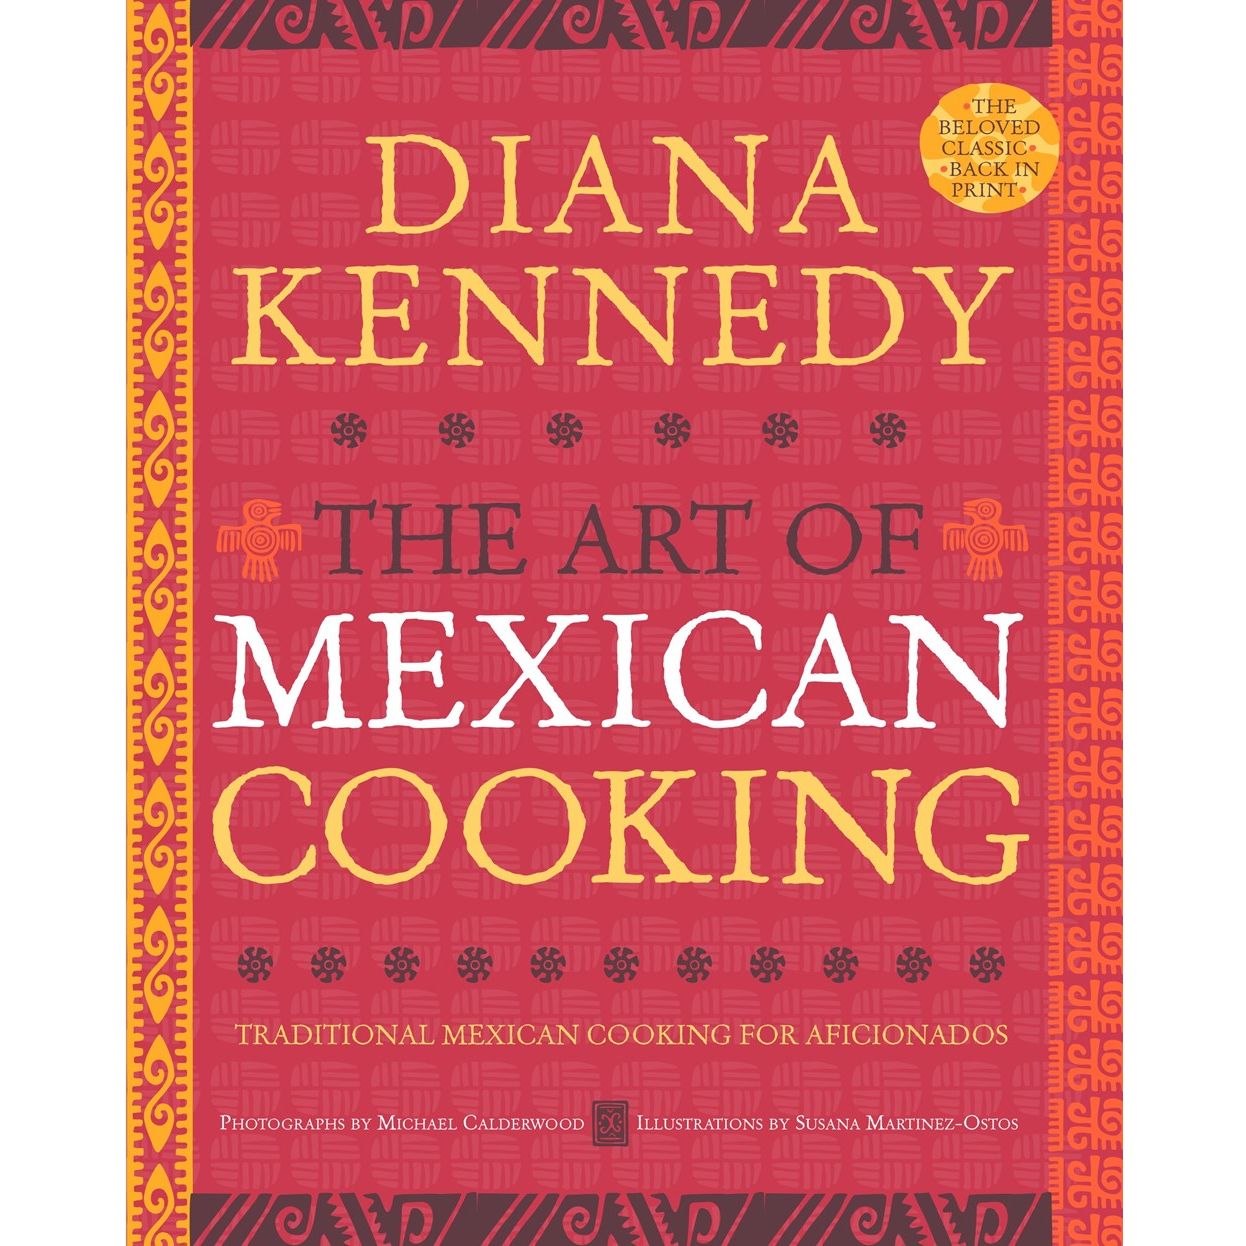 The Art of Mexican Cooking (Diana Kennedy)